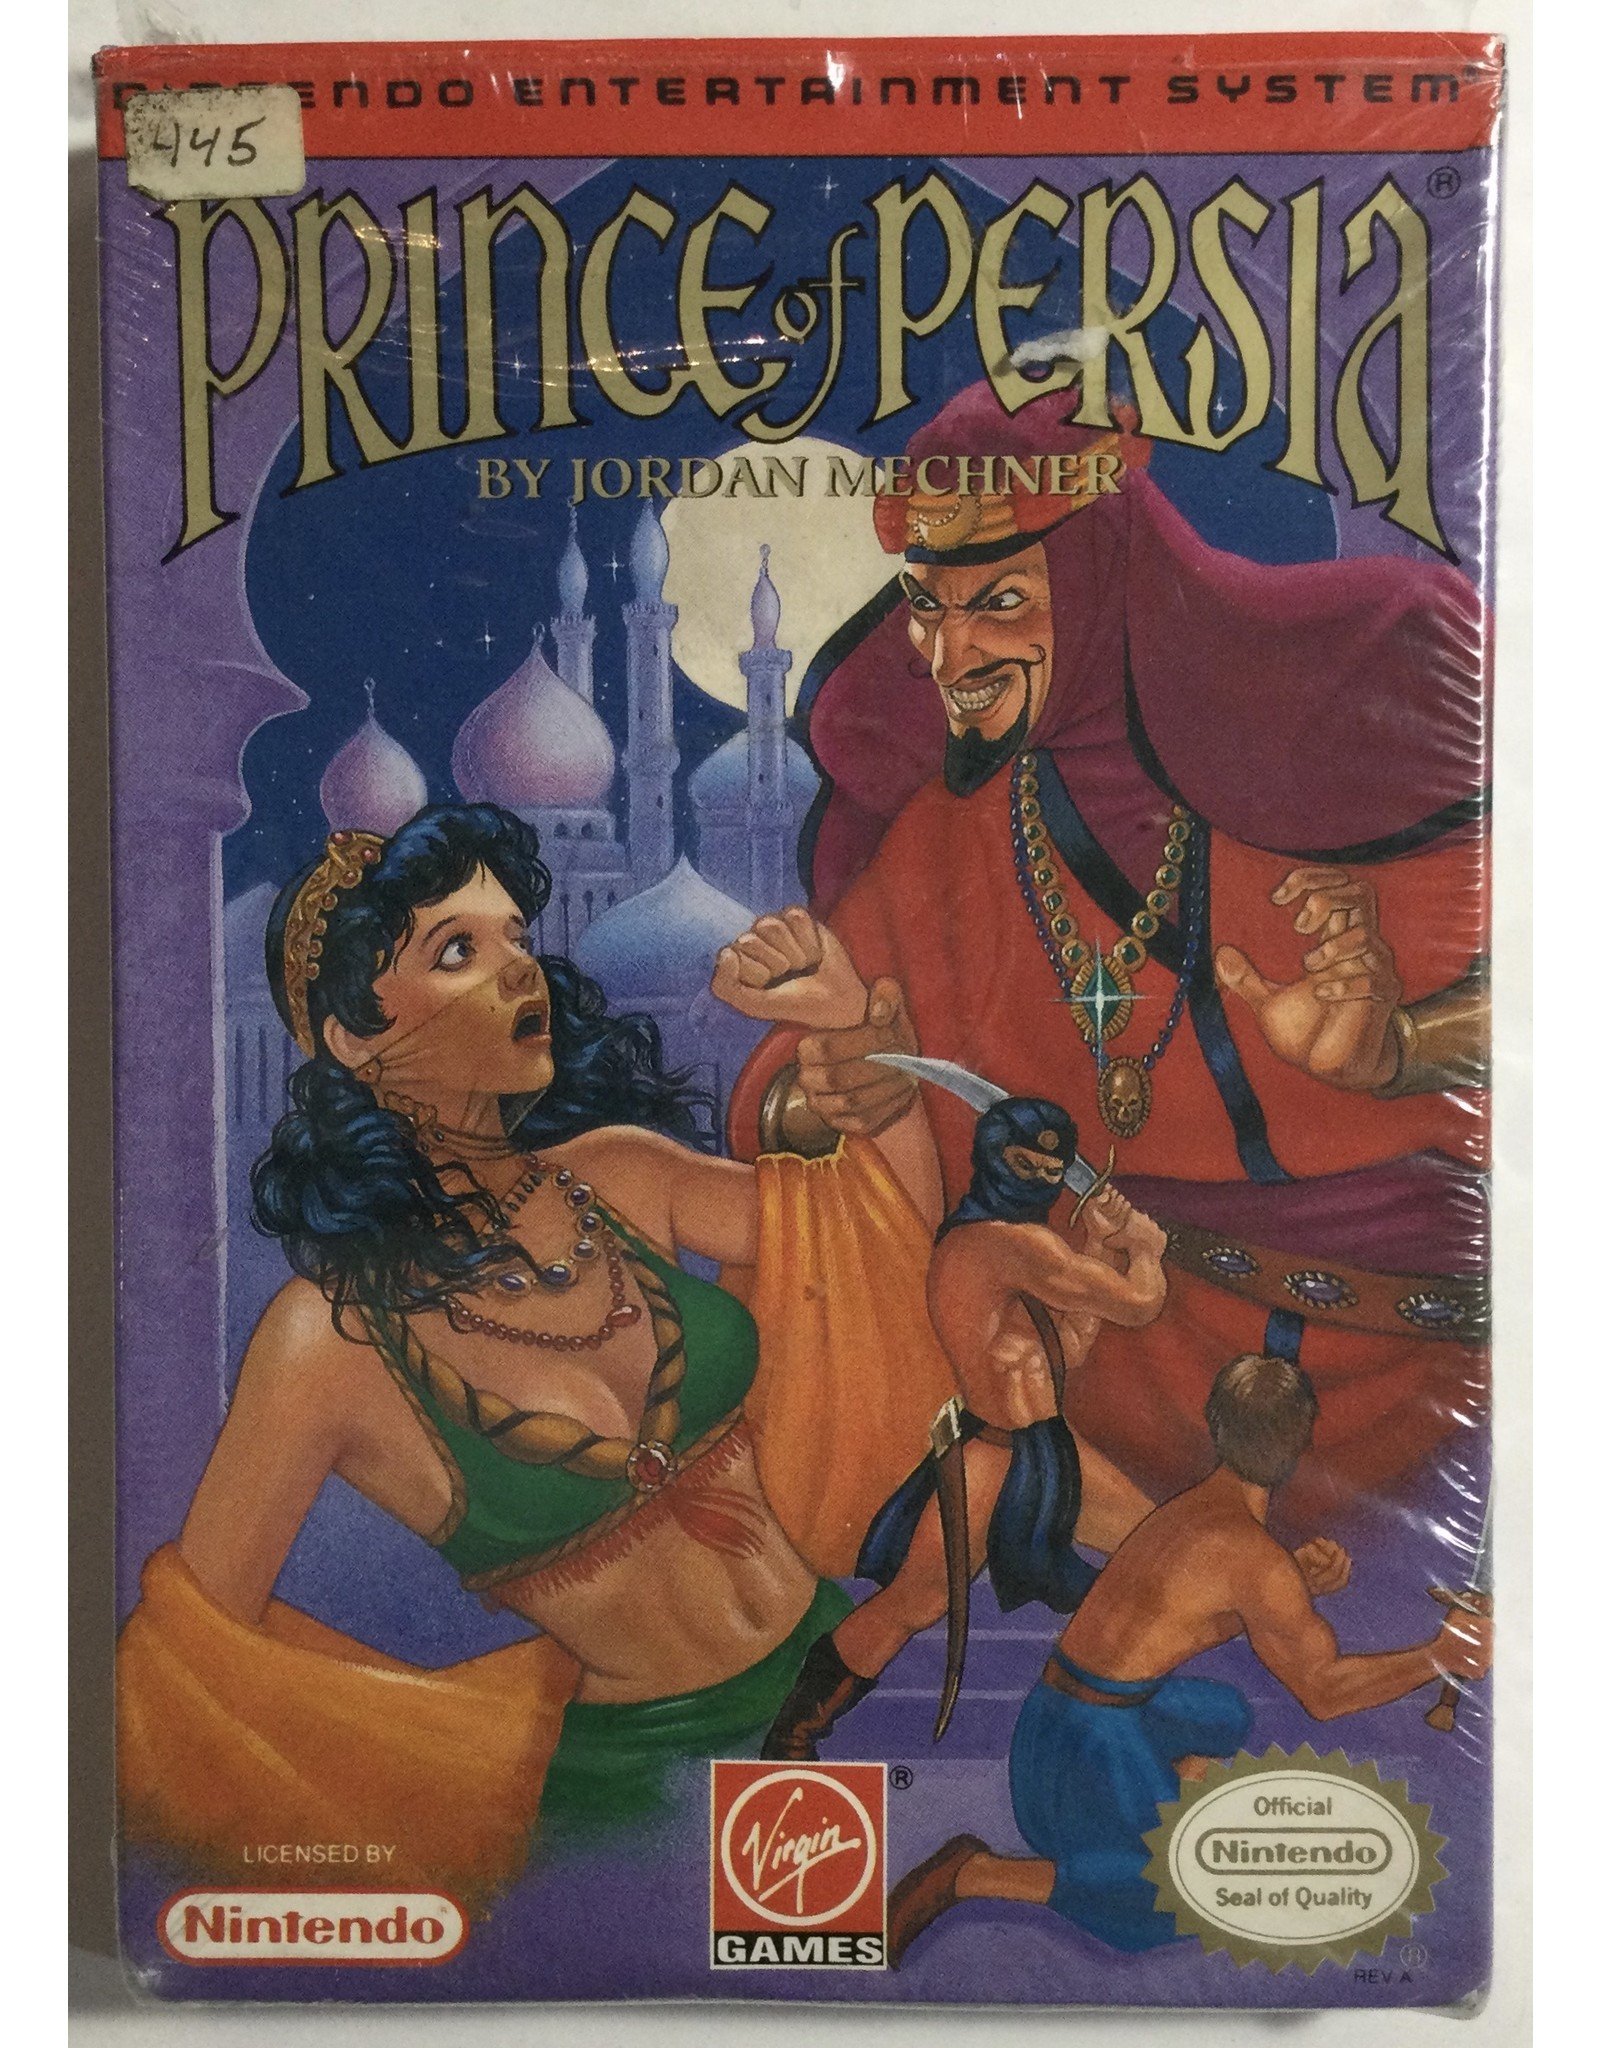 VIRGIN GAMES Prince of Persia for Nintendo Entertainment System (NES)